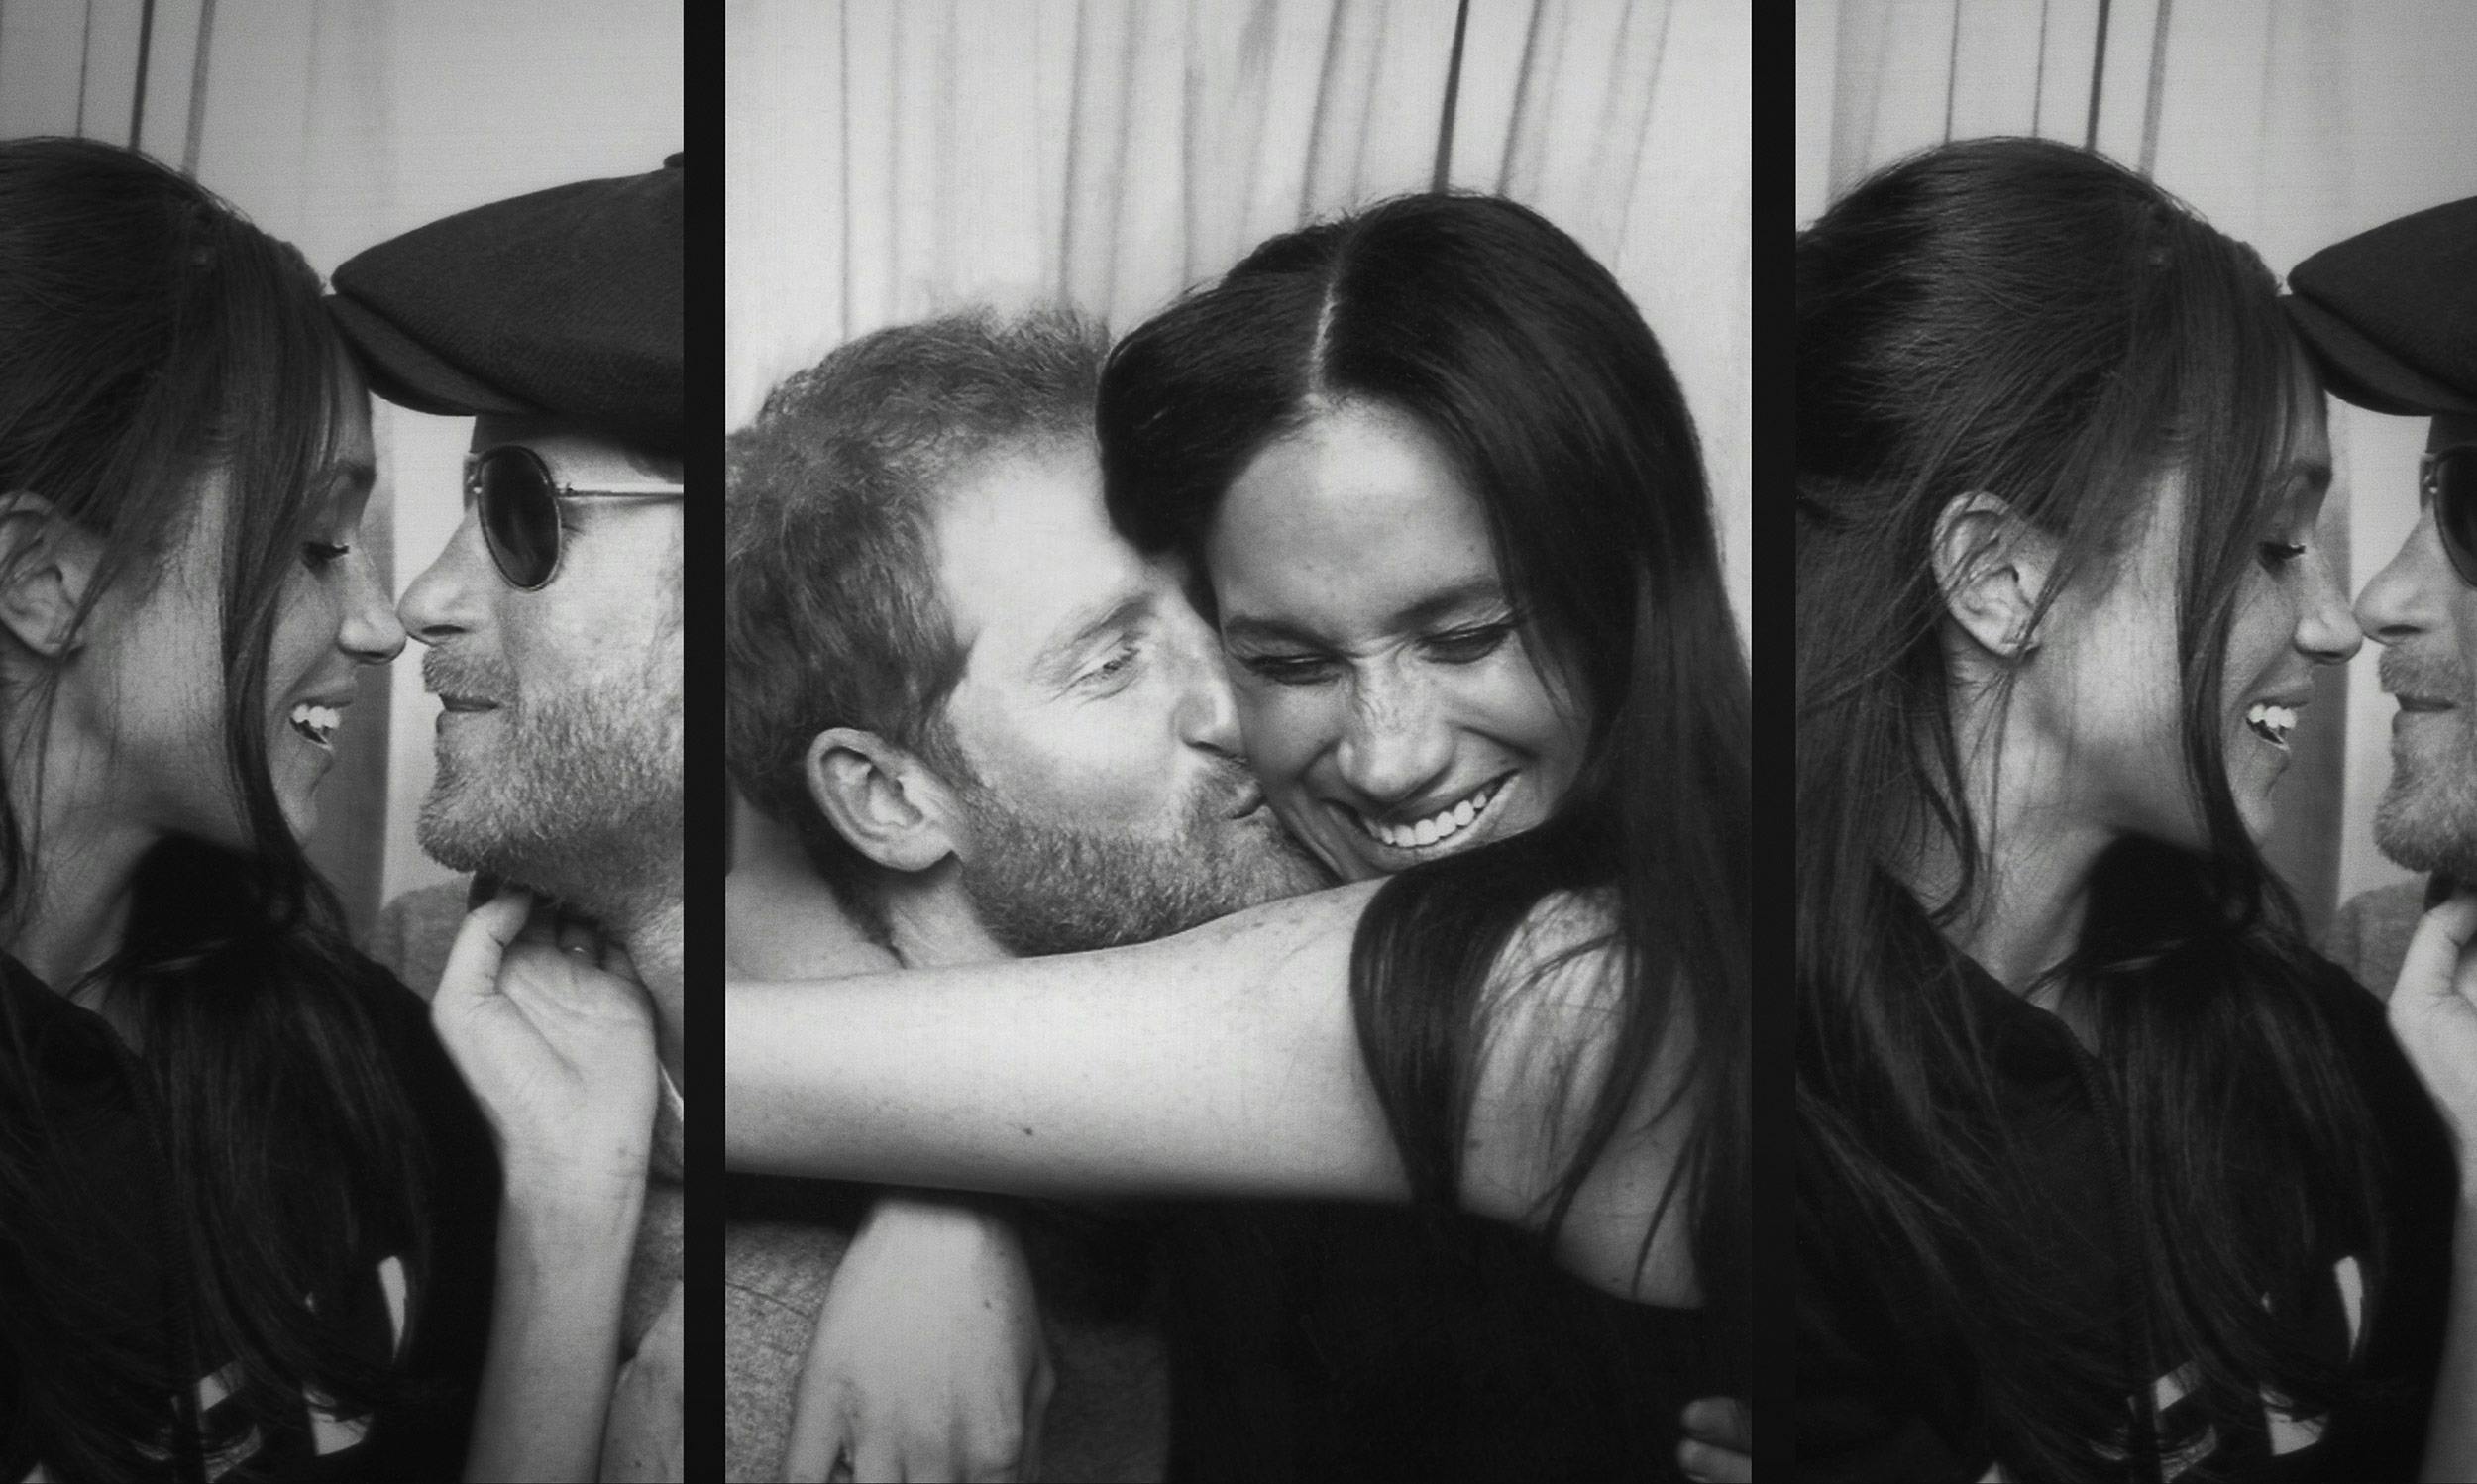 In a series of photobooth pictures, Meghan and Harry kiss and hug. Harry wears a paperboy hat and sunglasses and Meghan wears a black top.